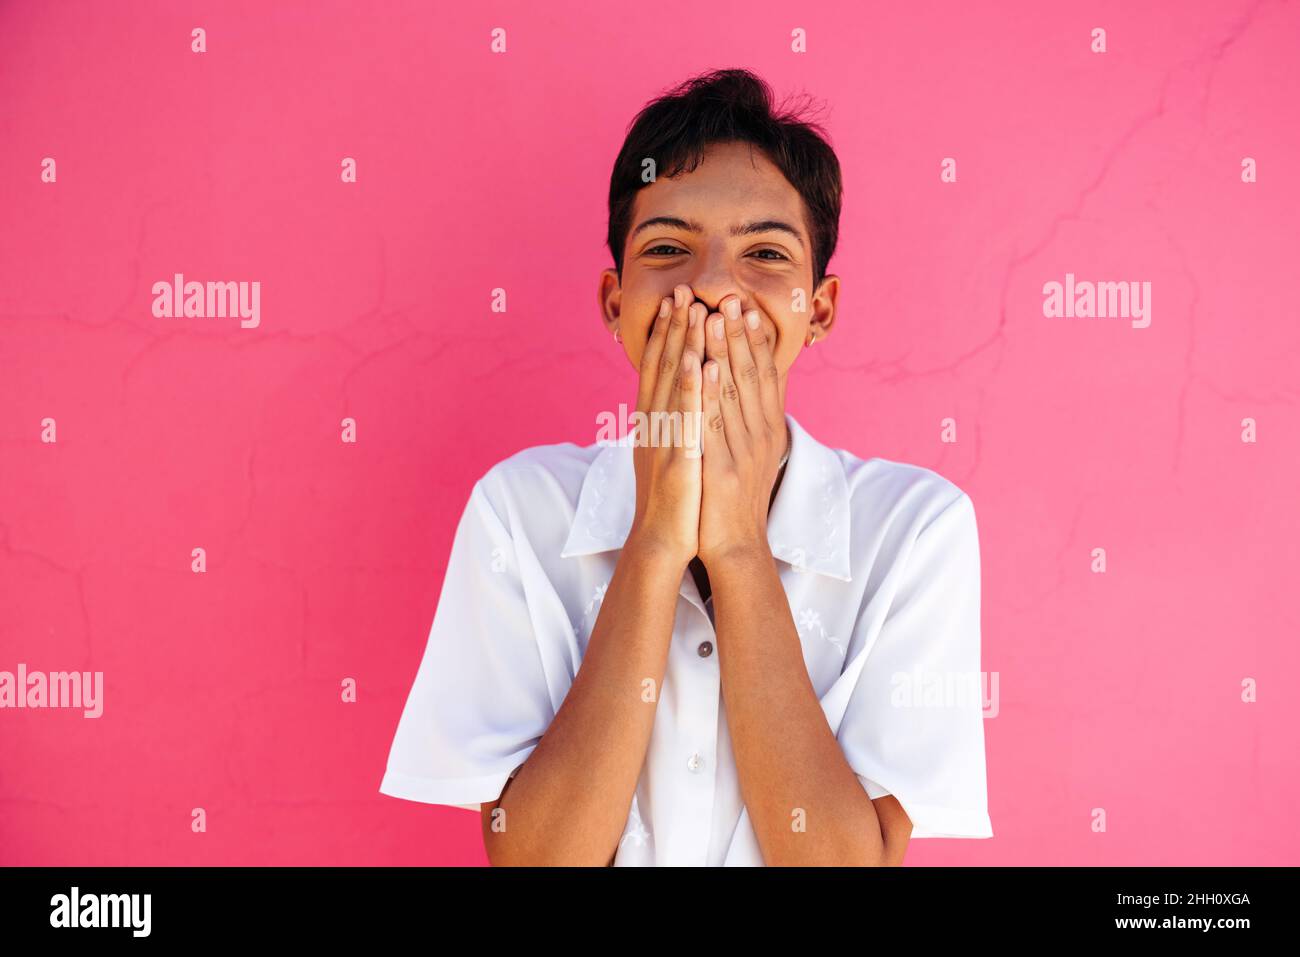 Cheerful queer boy coming out and embracing his identity. Happy gay teenager covering his mouth with his hands while smiling. Young teenage boy standi Stock Photo